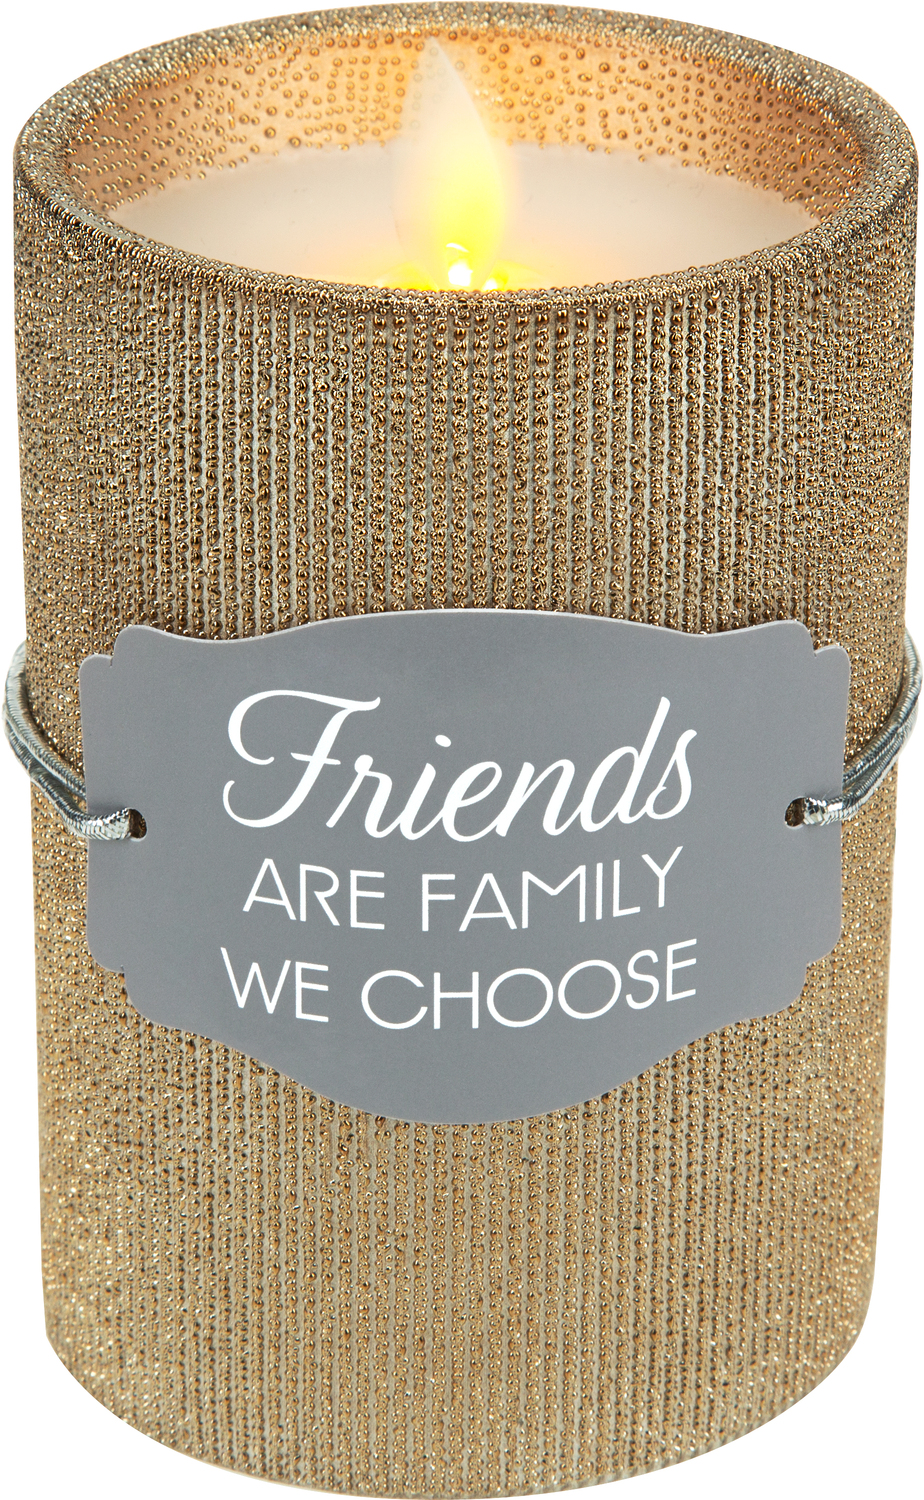 Friends by Candle Decor - Friends - 4.75" Bronze Glitter Realistic Flame Candle 